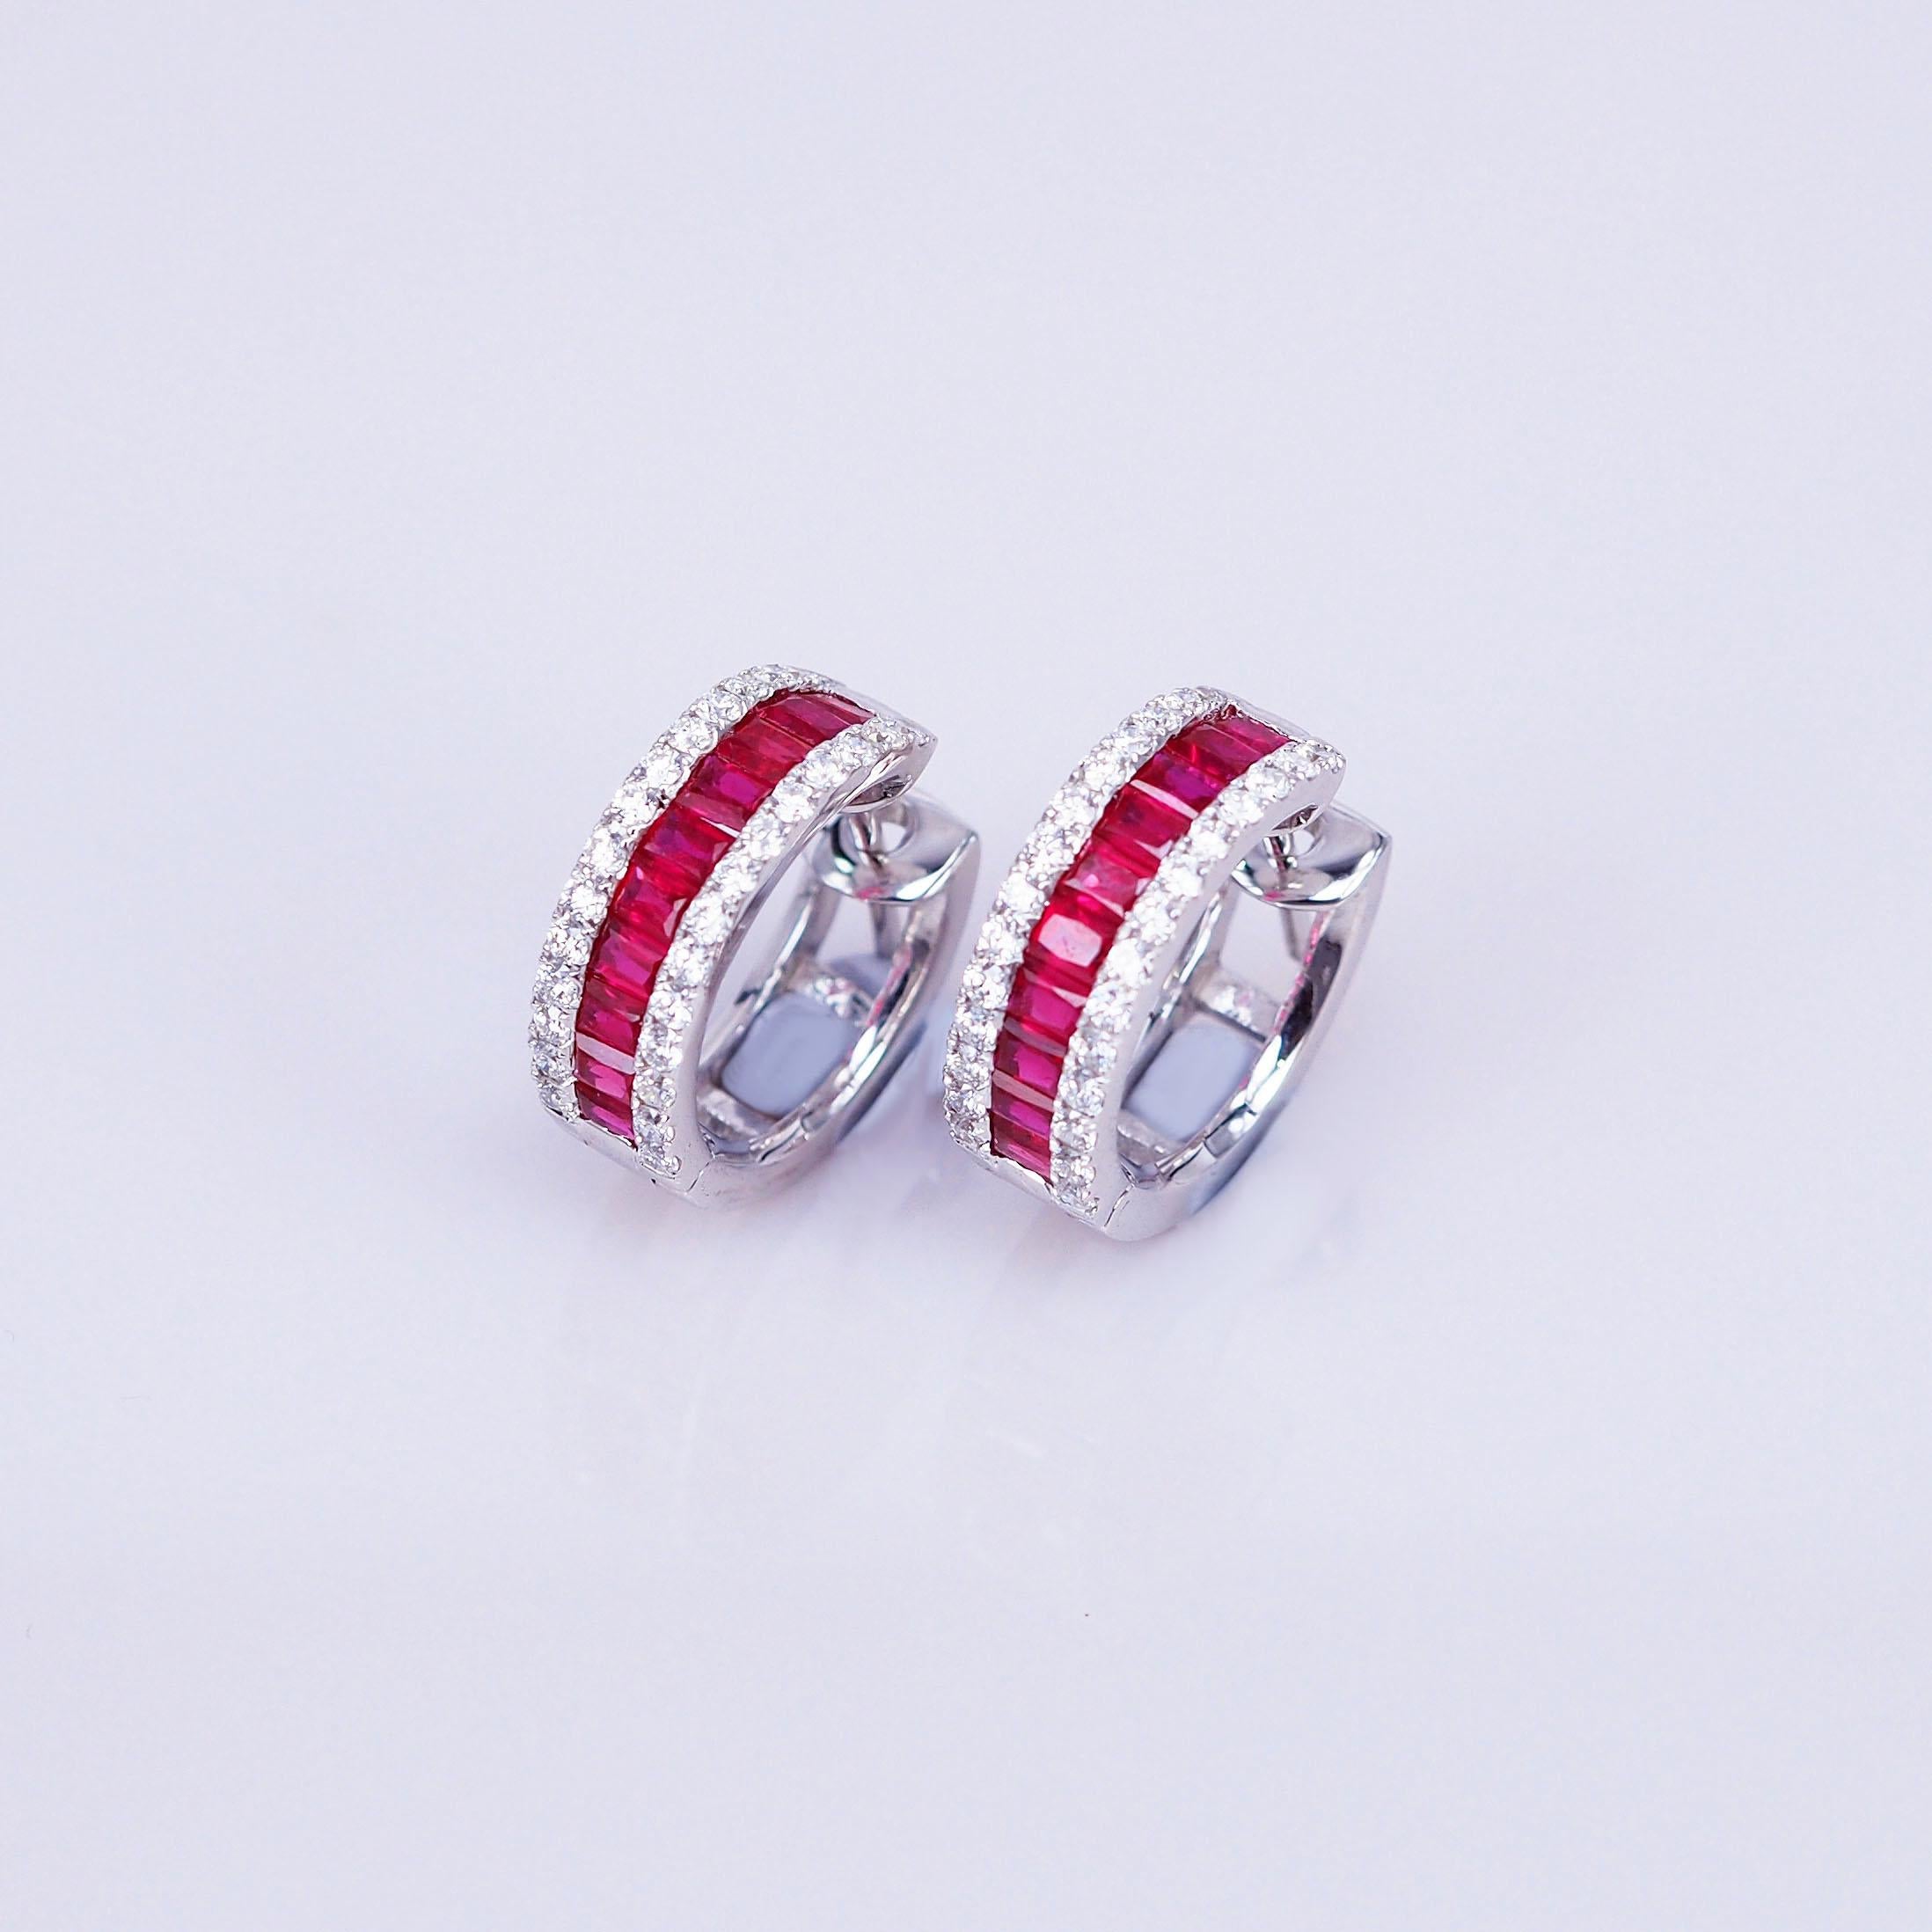 This earrings is  top quality Ruby which make in invisible setting. We set the stone in perfection as we are professional in this kind of setting more than 40 years. The invisible is a highly technique .We cut and groove every stone .Therefore; we